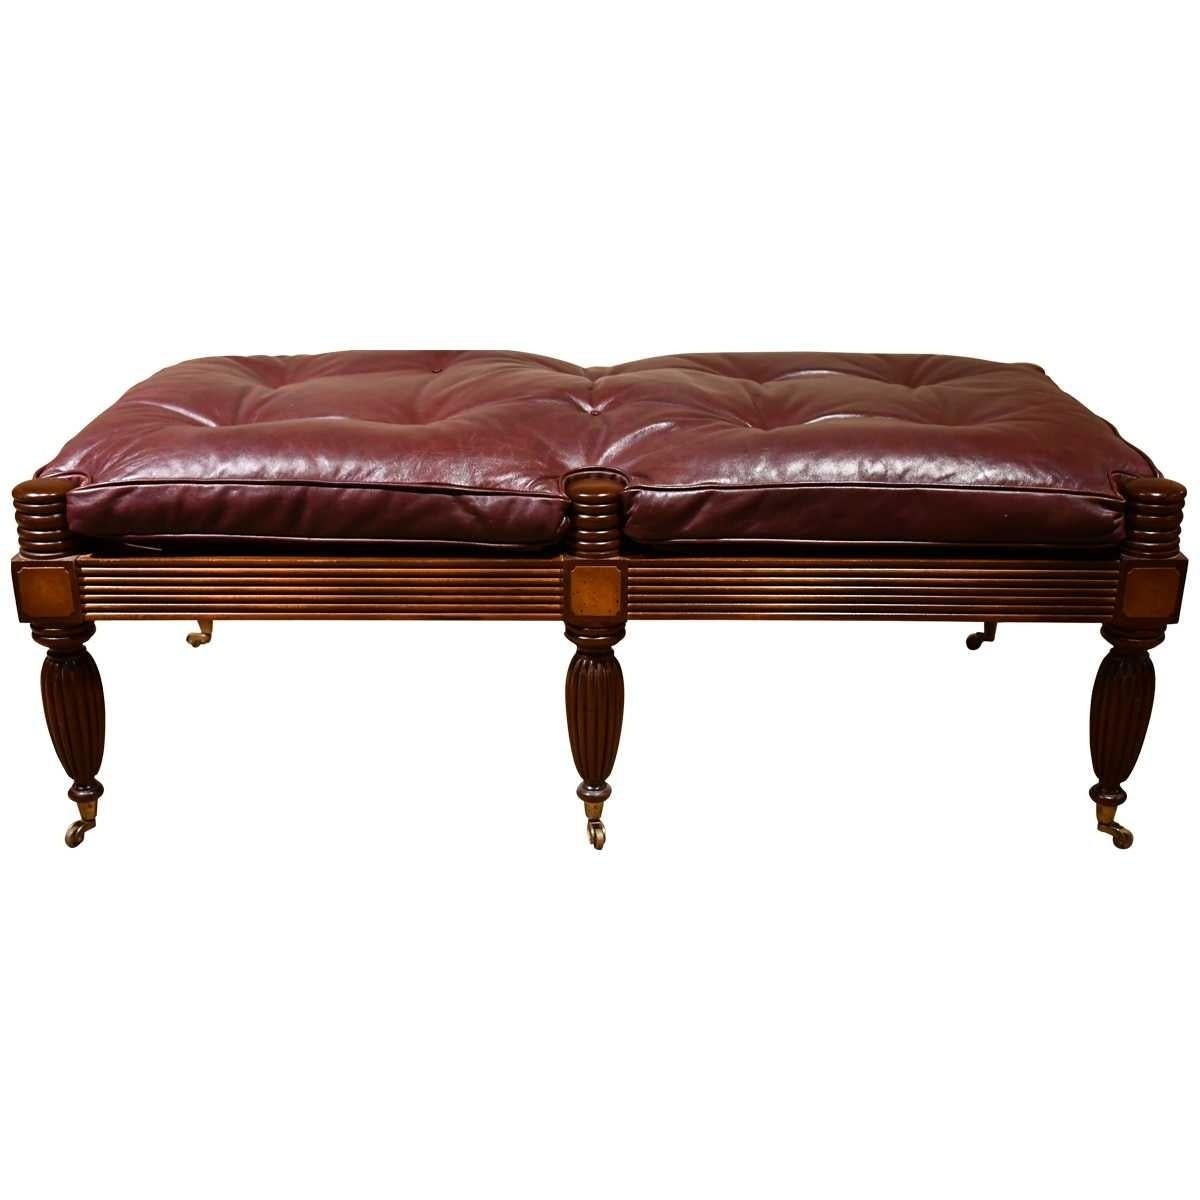 Attractive Regency Style Mahogany Bench with Button Tufted Leather Squab 1